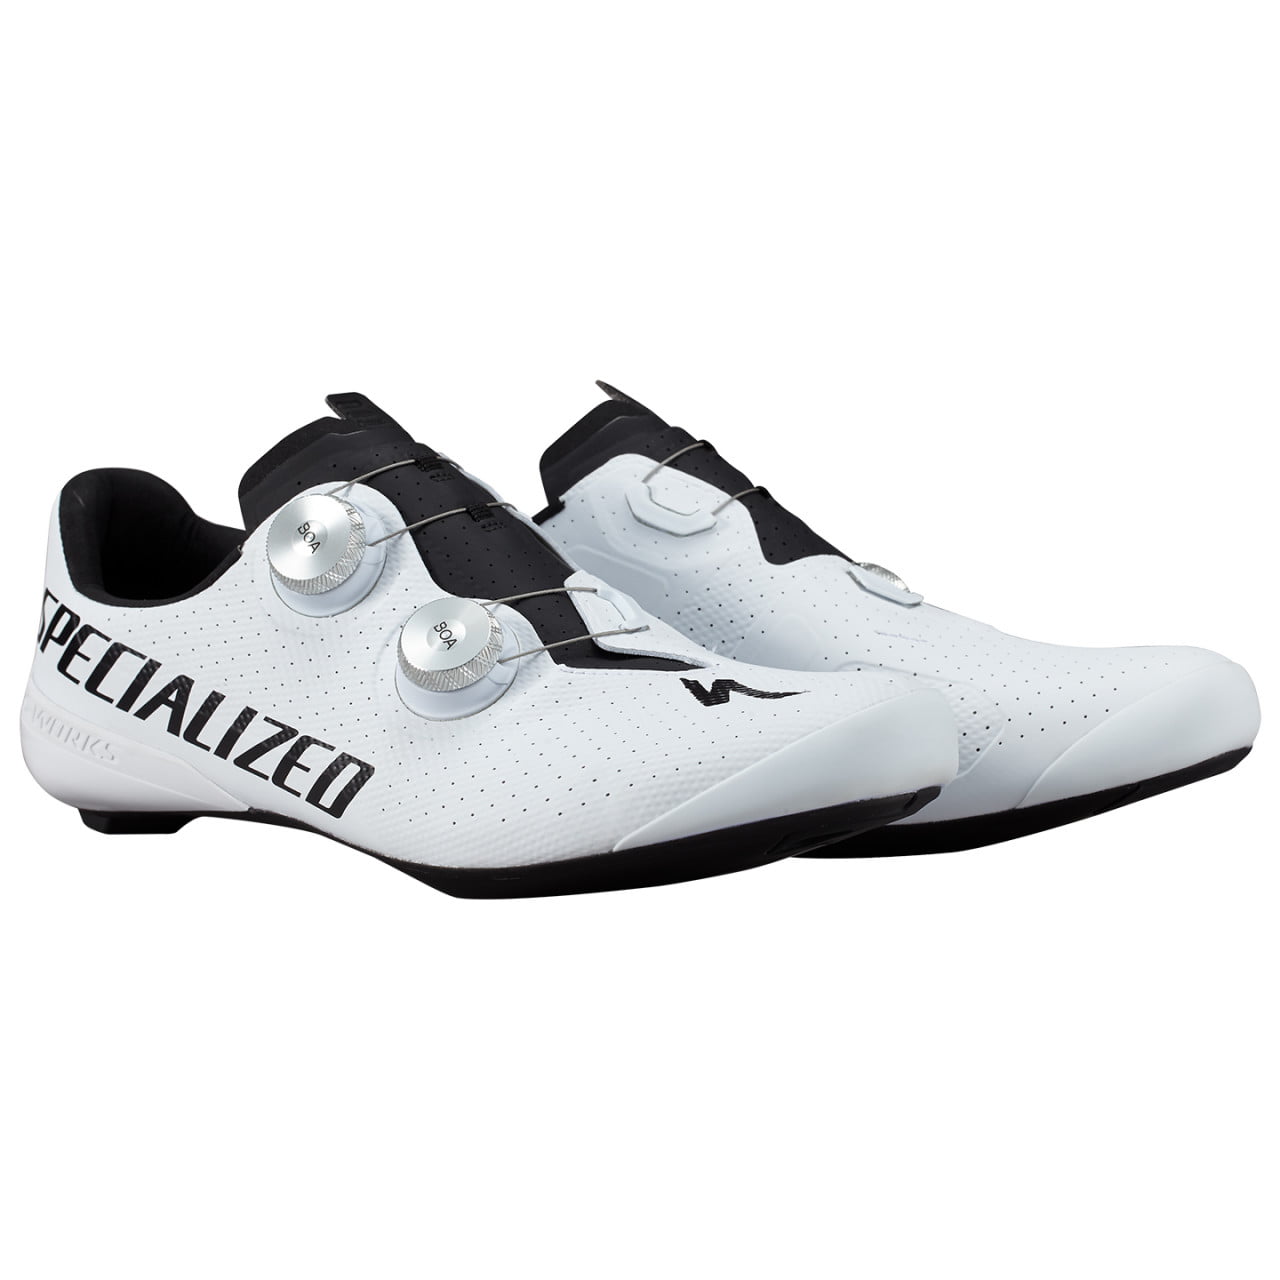 Road Shoes S-Works Torch 2024